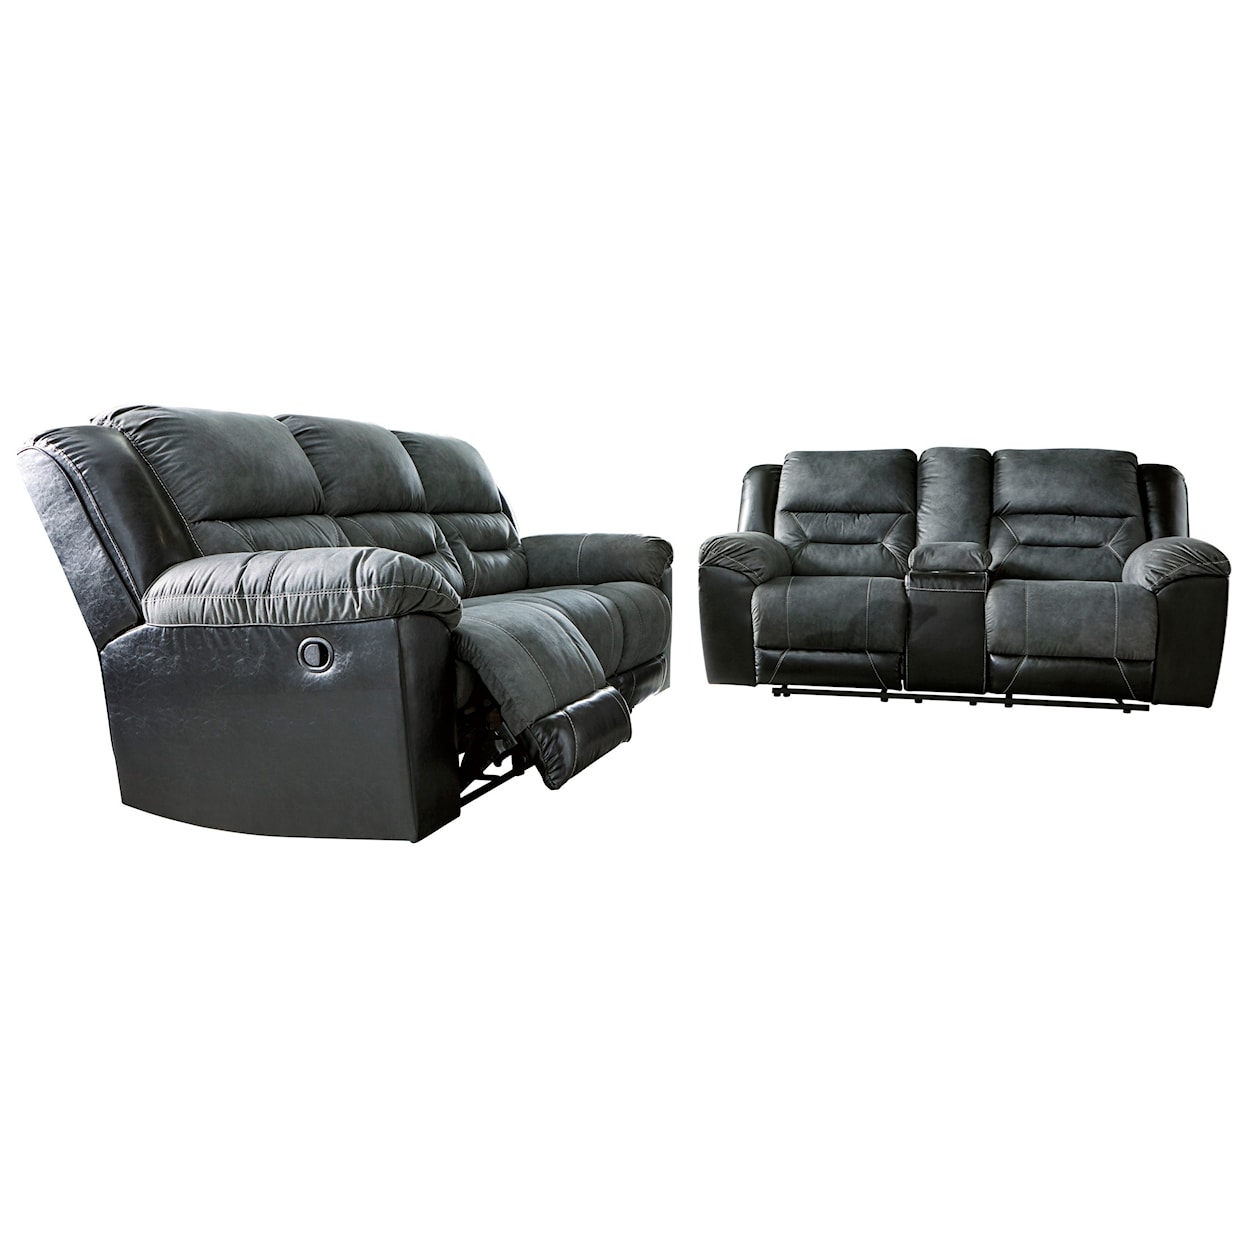 Ashley Earhart Reclining Loveseat with Console